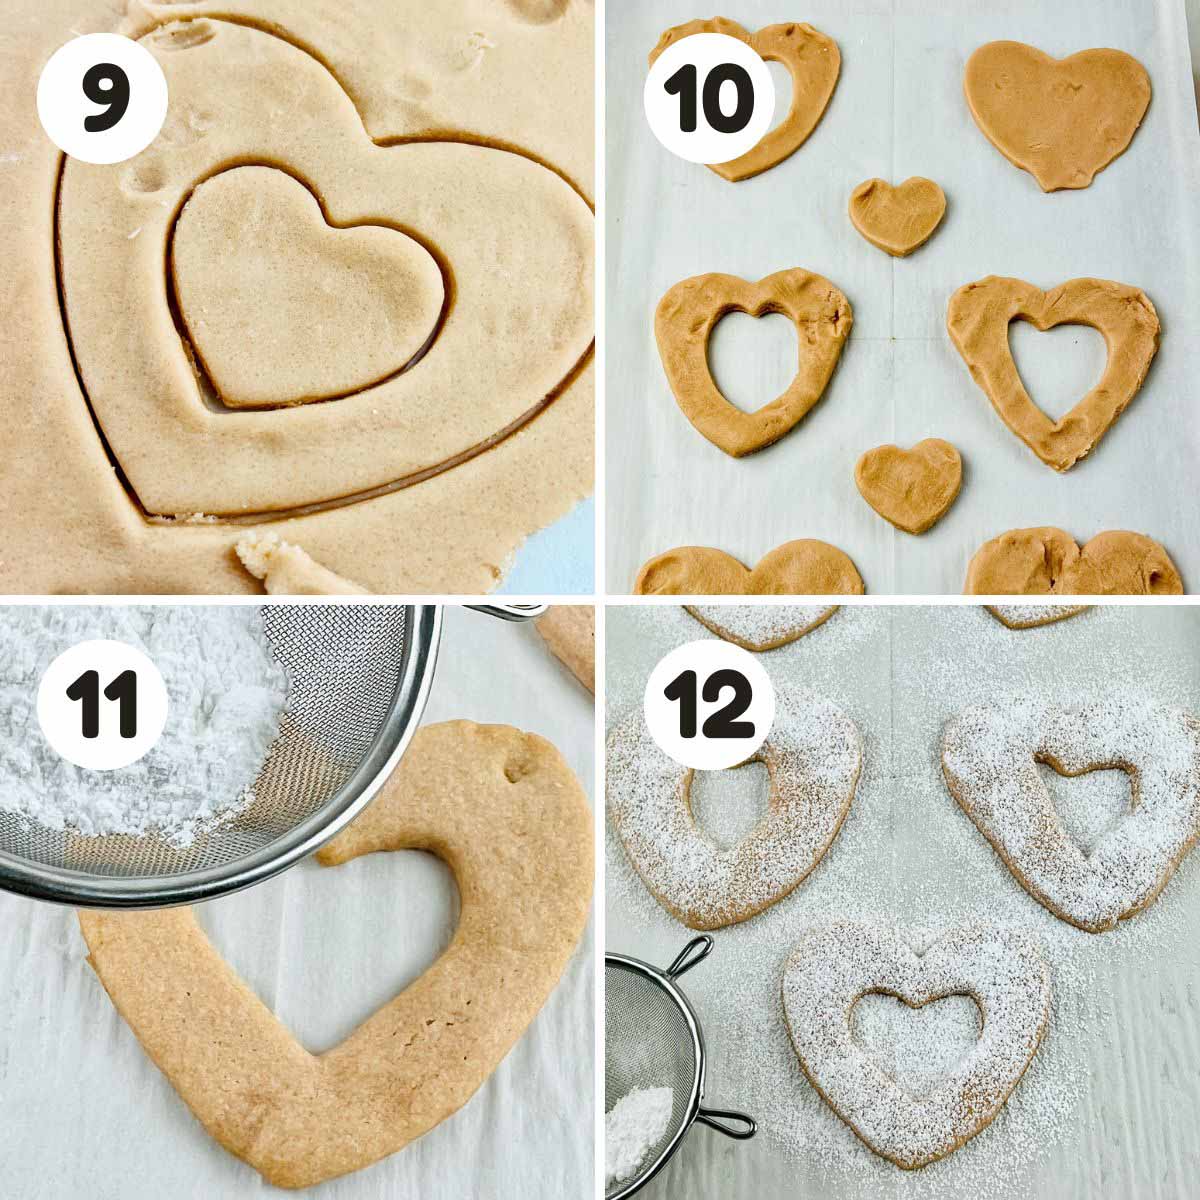 Steps to cut the heart shape out of cookie dough.